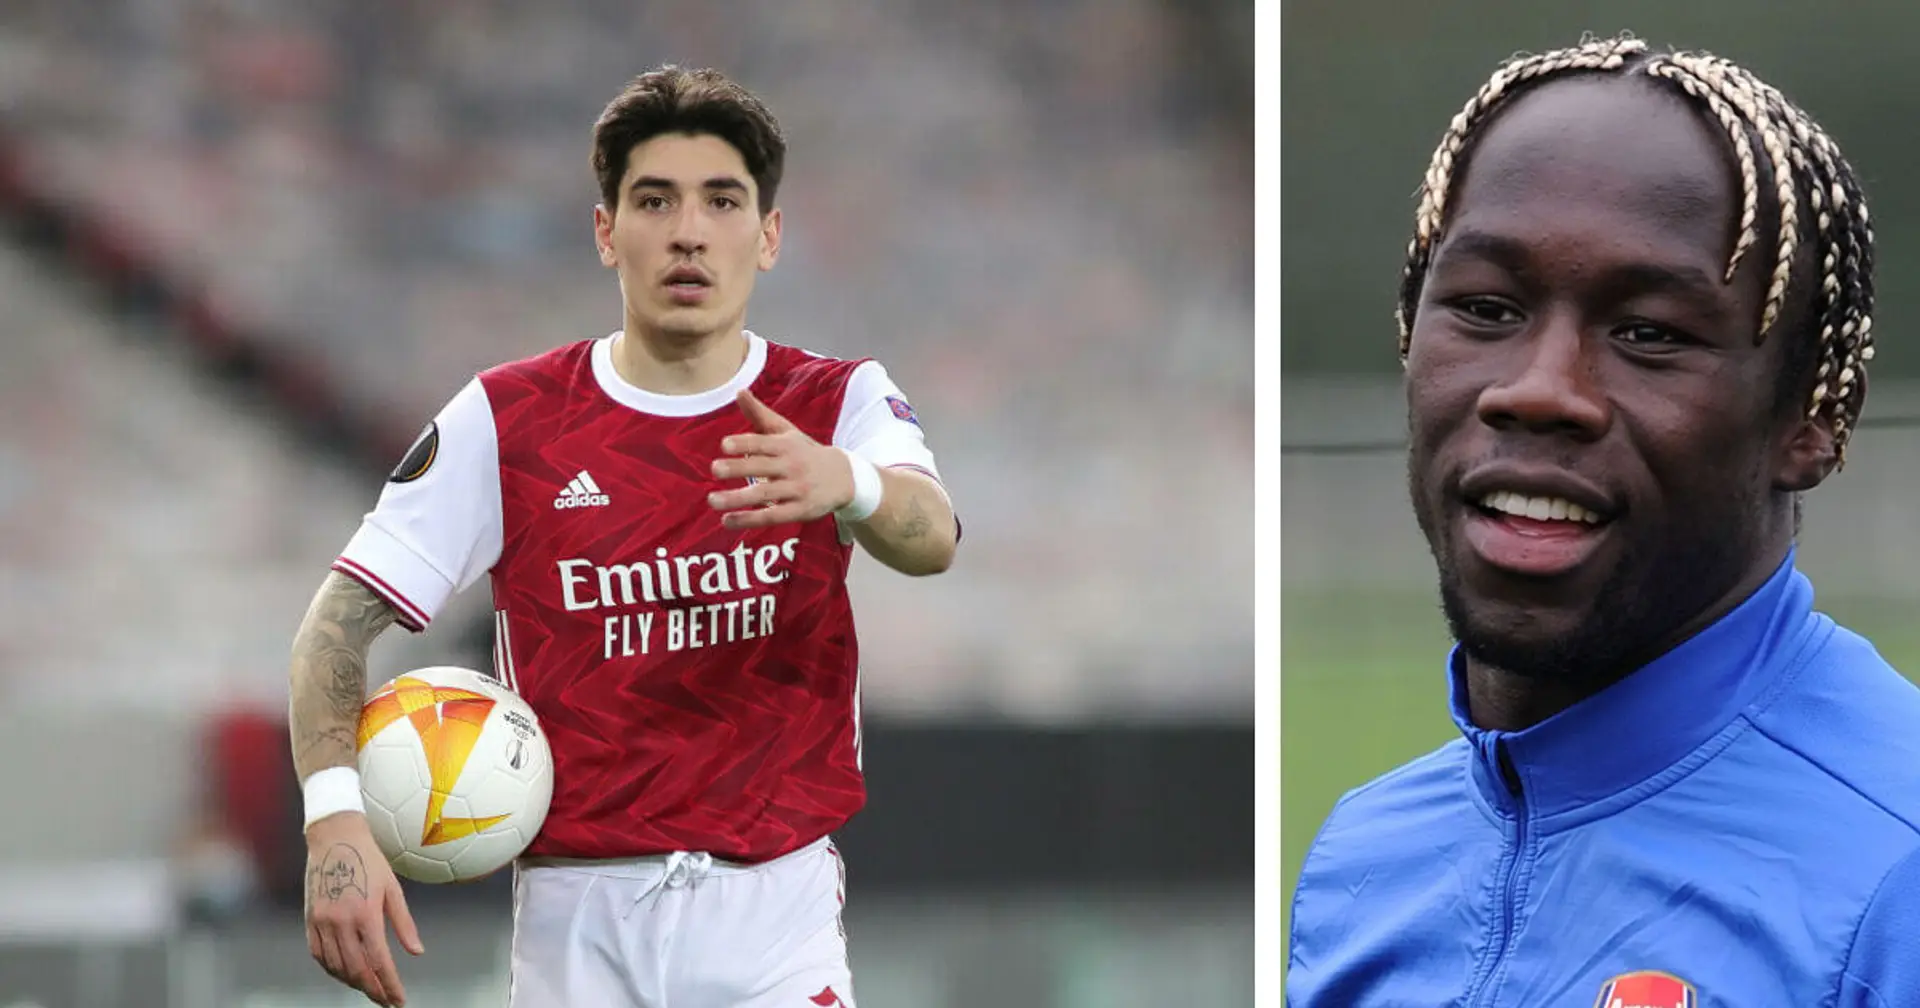 Sagna: 'Bellerin has been criticised a lot but people forget his injury'